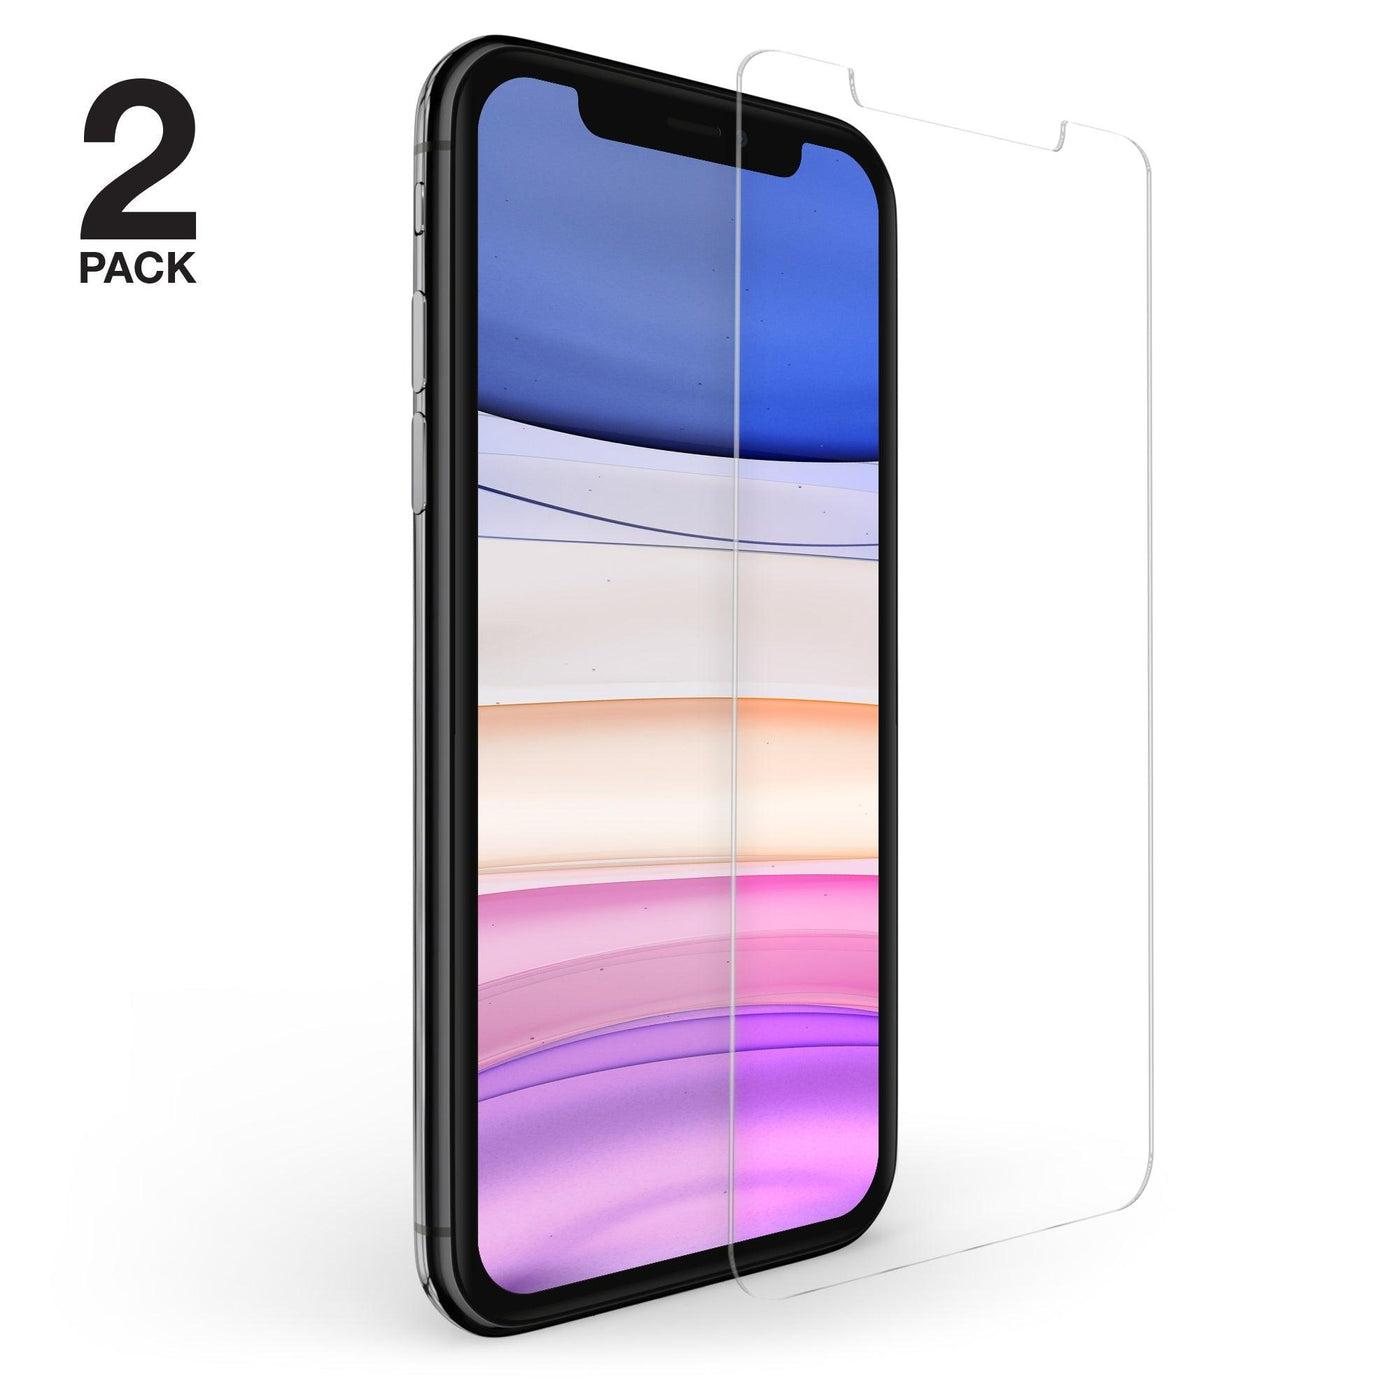 HD Tempered Glass iPhone 11 Pro Max /XS Max - 2pck